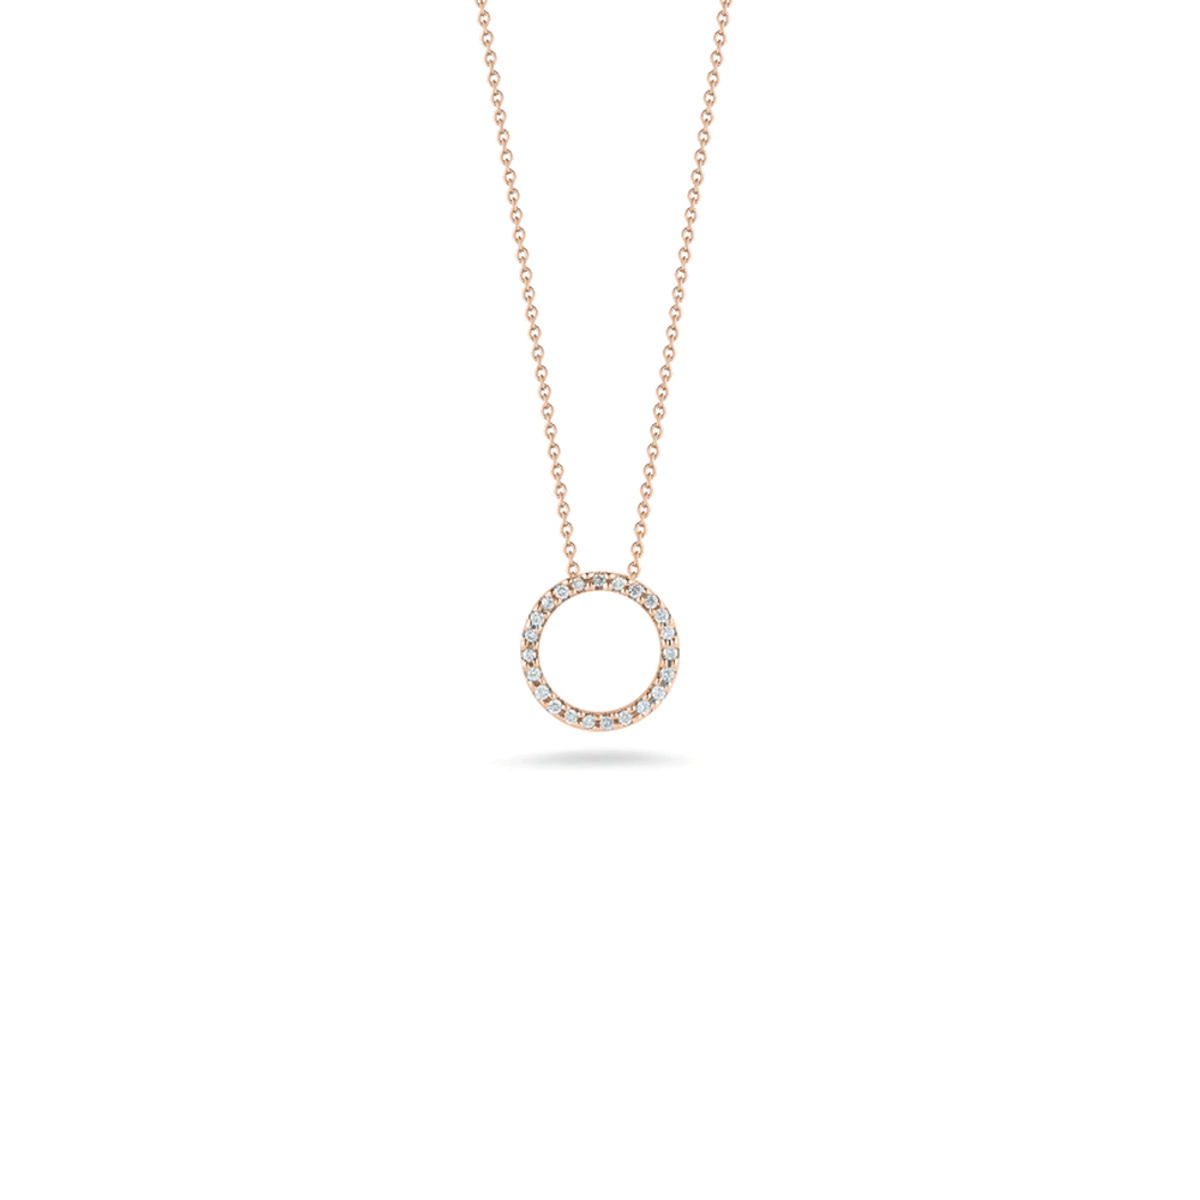 Roberto Coin 18K Rose Gold Diamond Circle Necklace-39744 Product Image